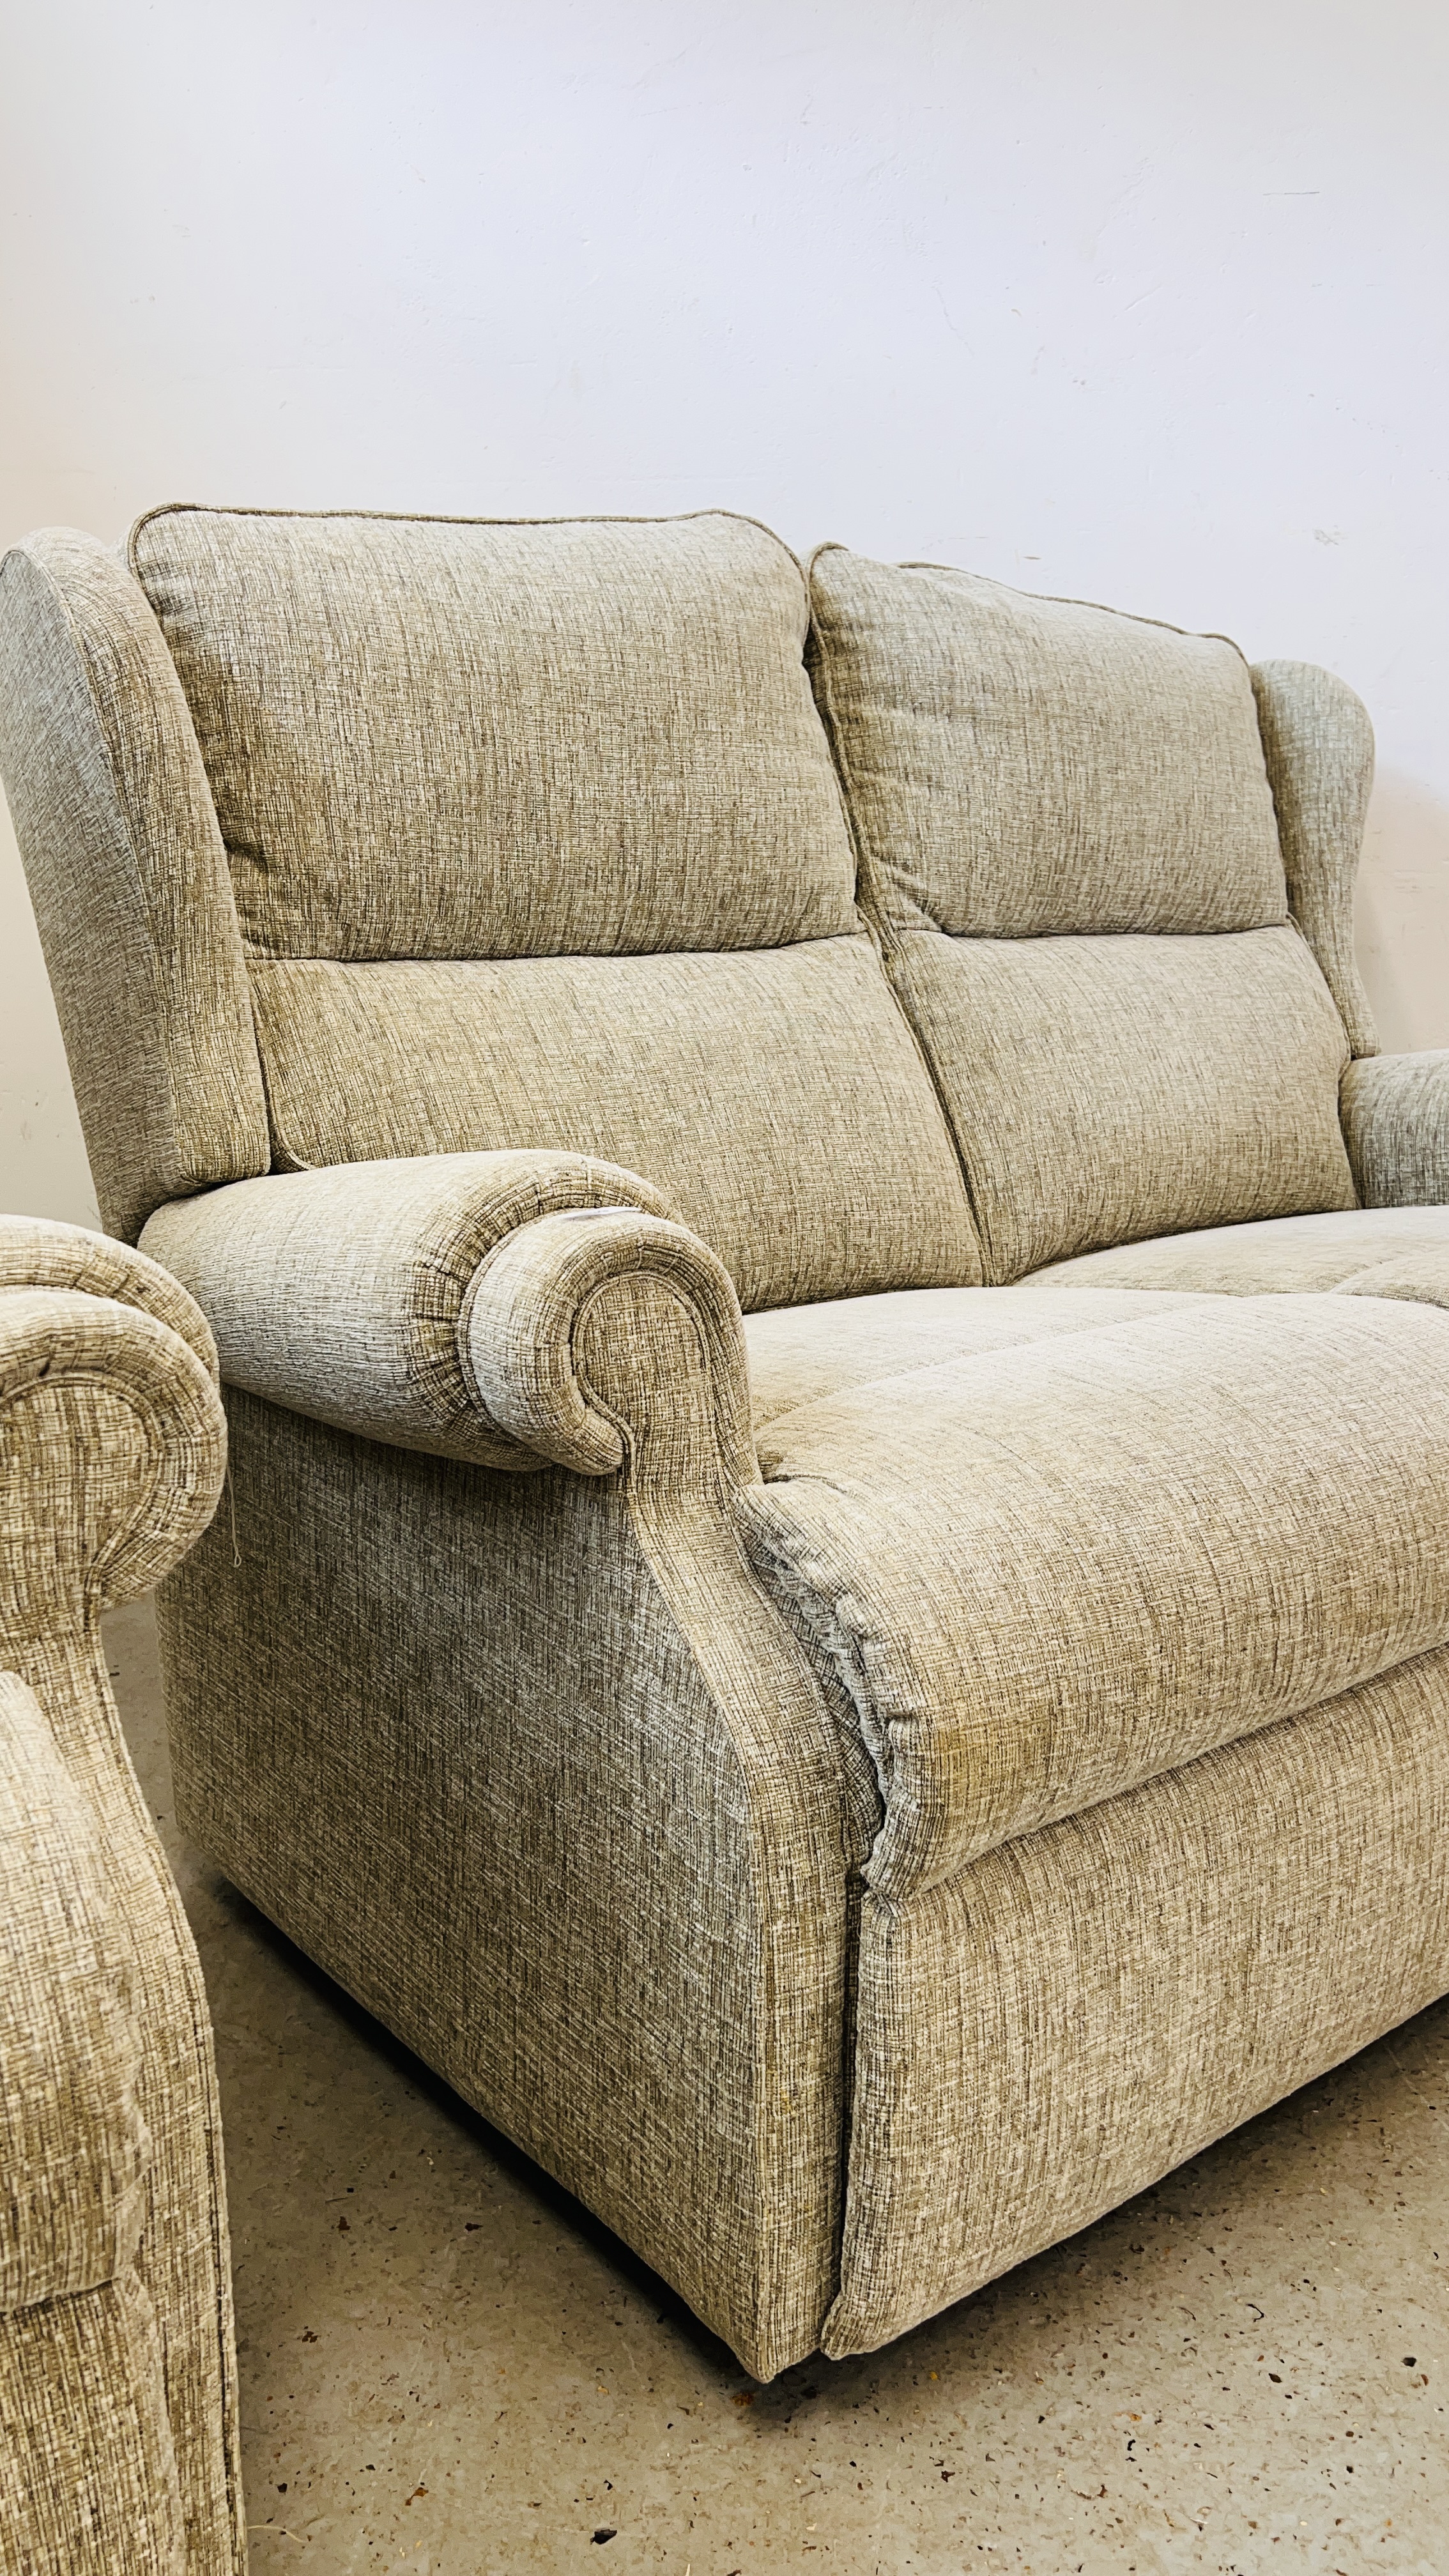 A GOOD QUALITY "SHERBORNE" TWO SEATER SOFA W 140CM X D 82CM X H 94CM ALONG WITH A MATCHING ARMCHAIR. - Image 12 of 14